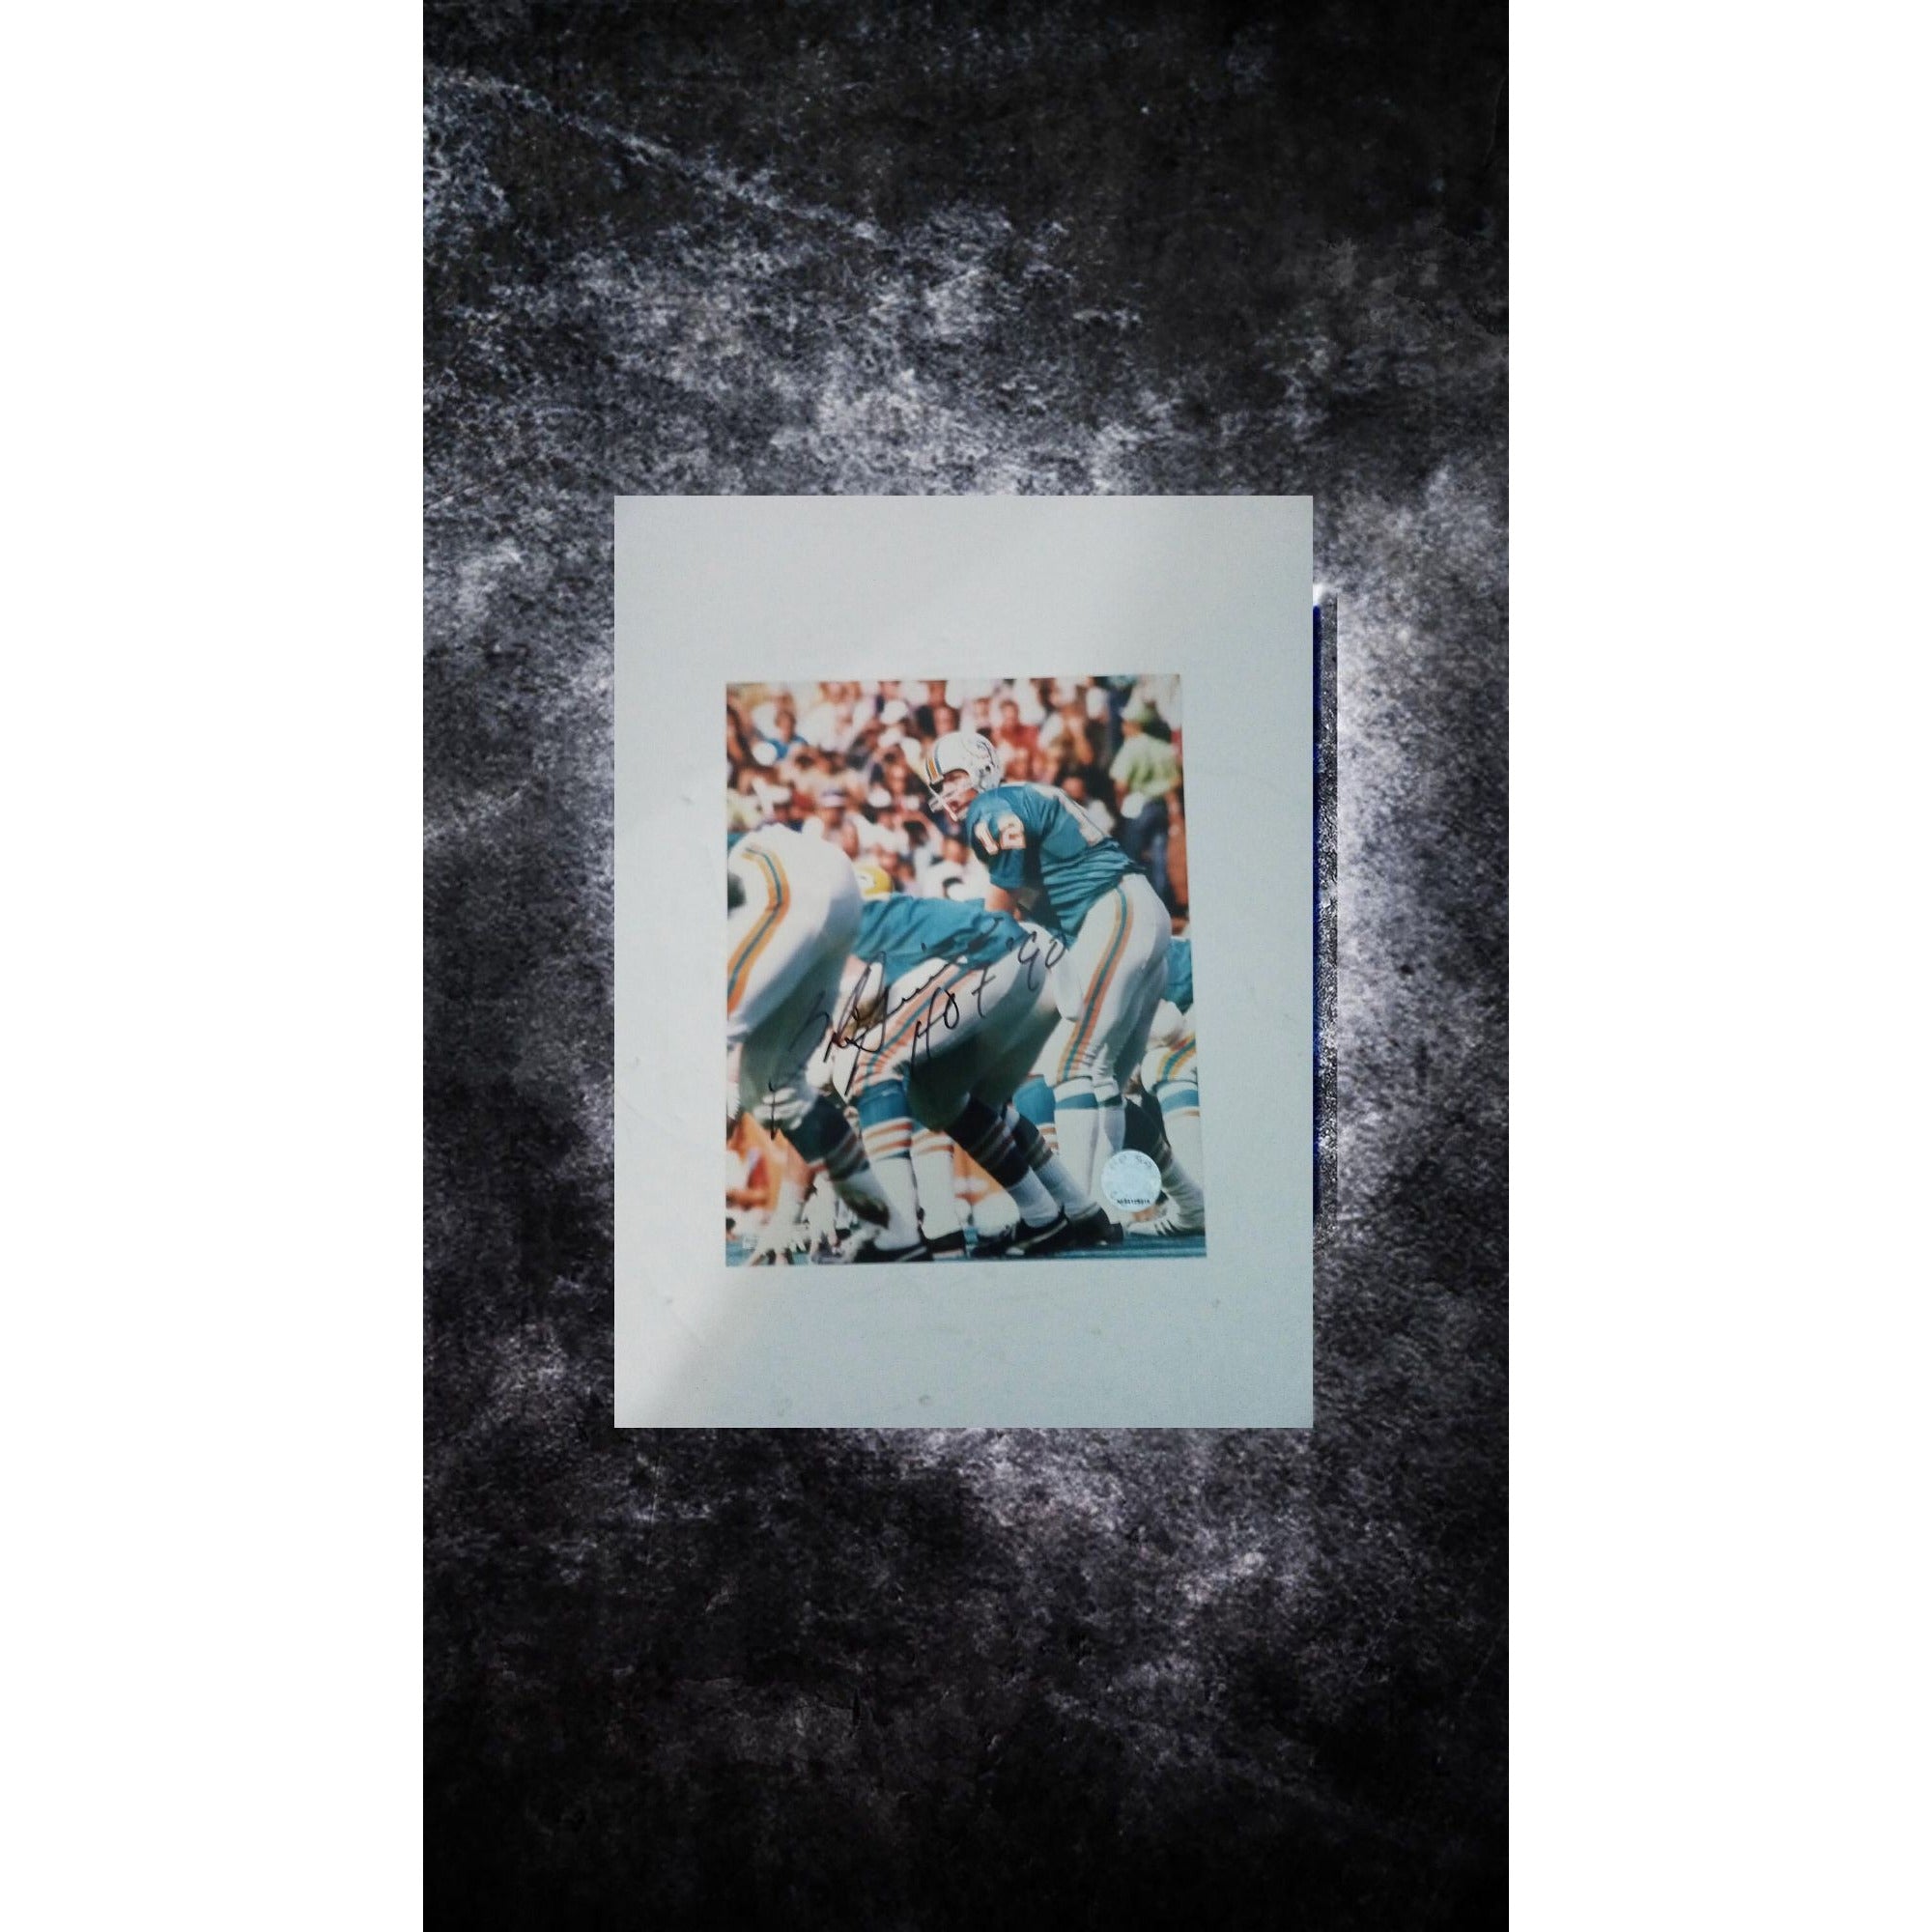 Bob Griesse Miami Dolphins 8x10 signed photo